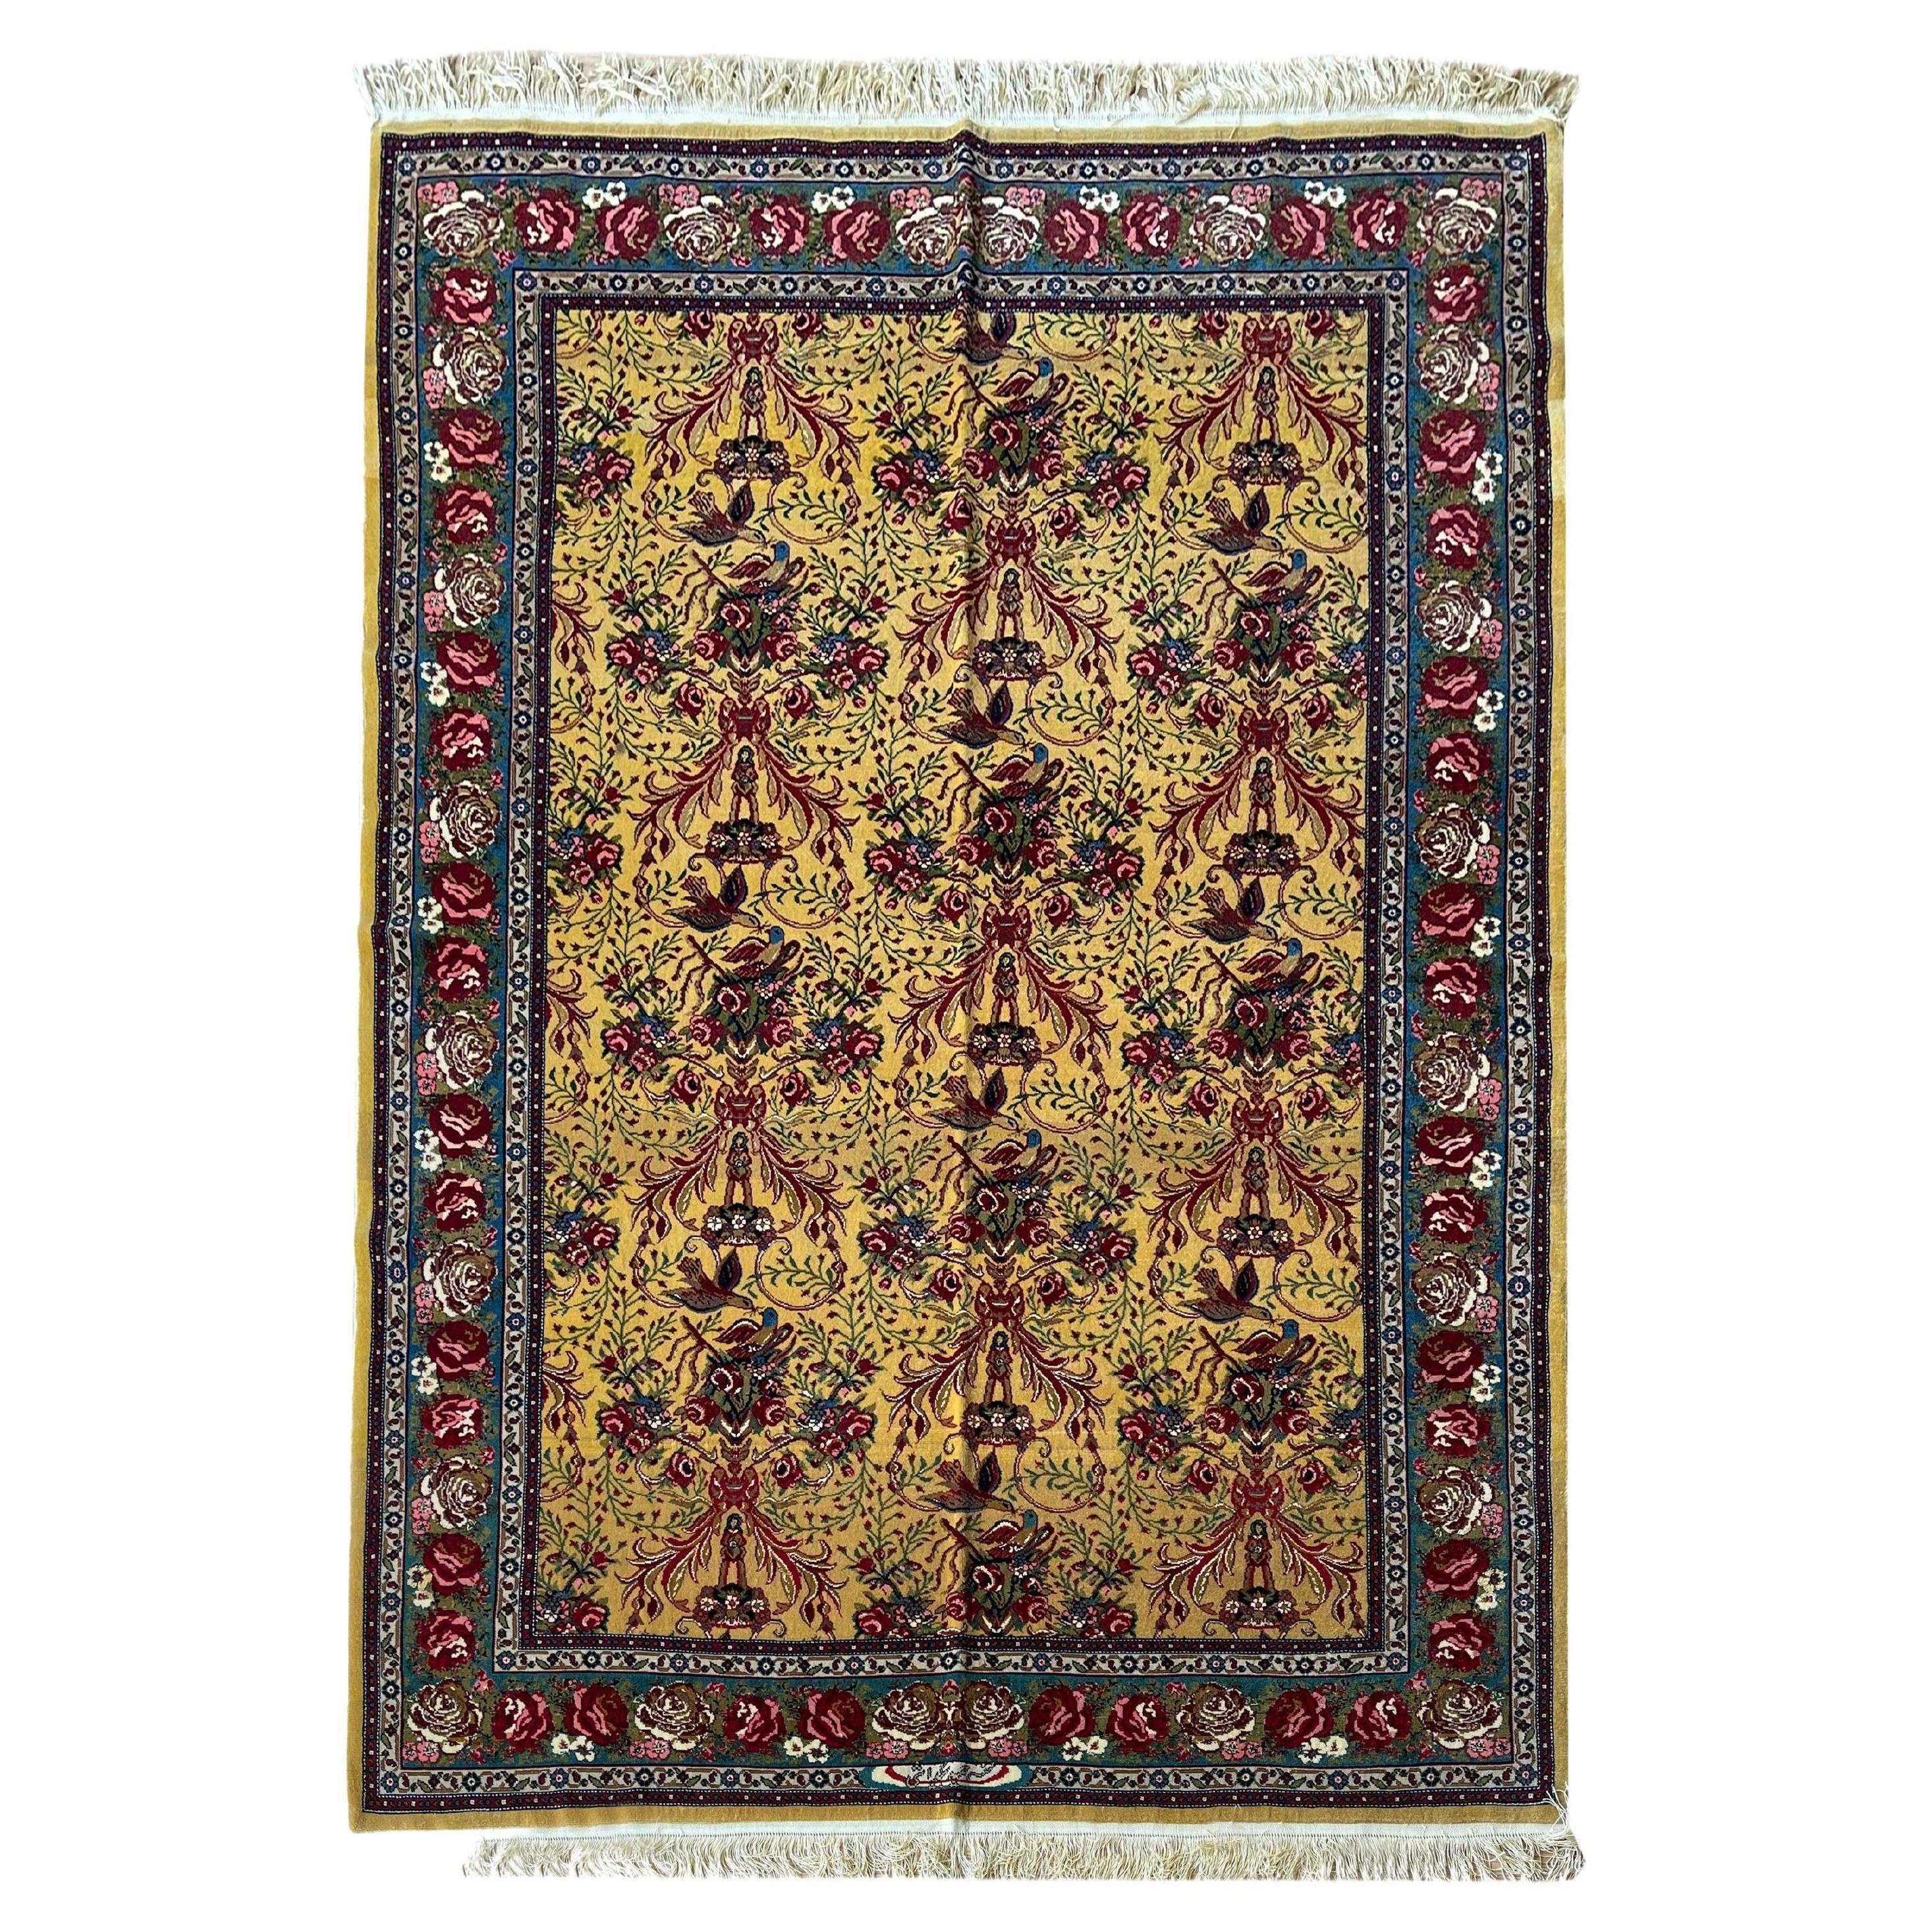 Outstanding Rug, All Over Paradise Carpet, Handwoven Gold Rug For Sale